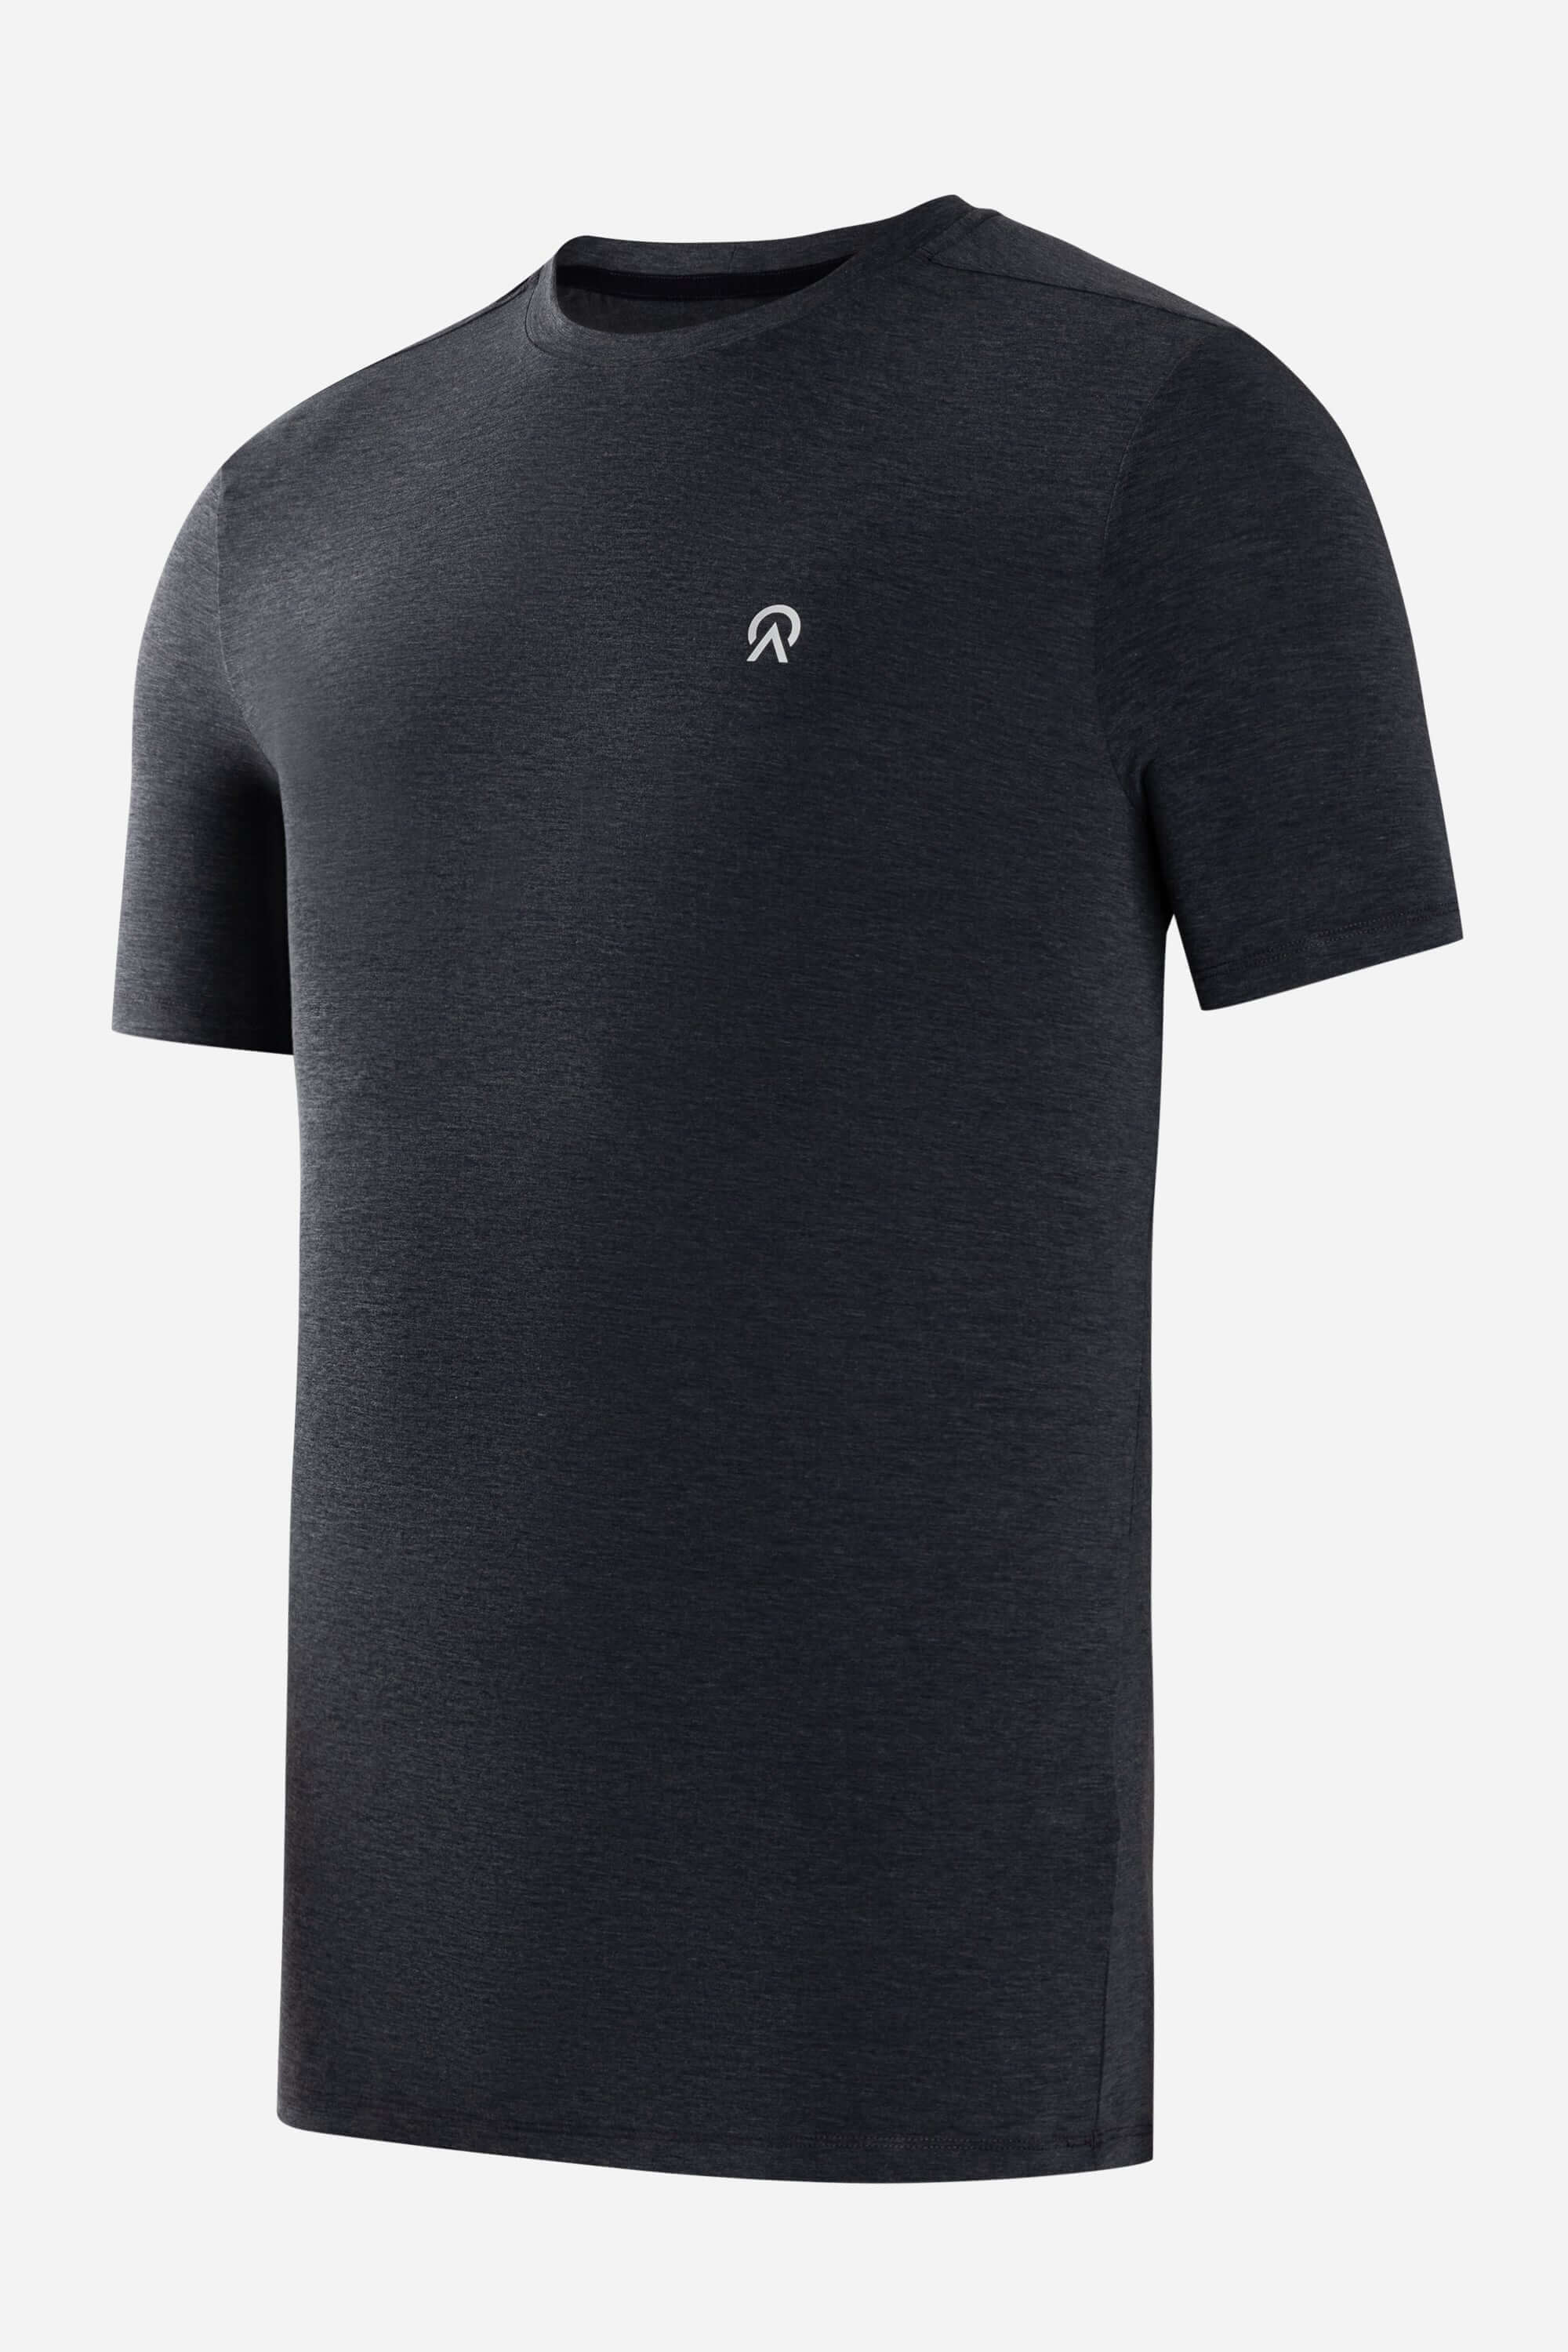 blue workout t-shirt with logo on chest 